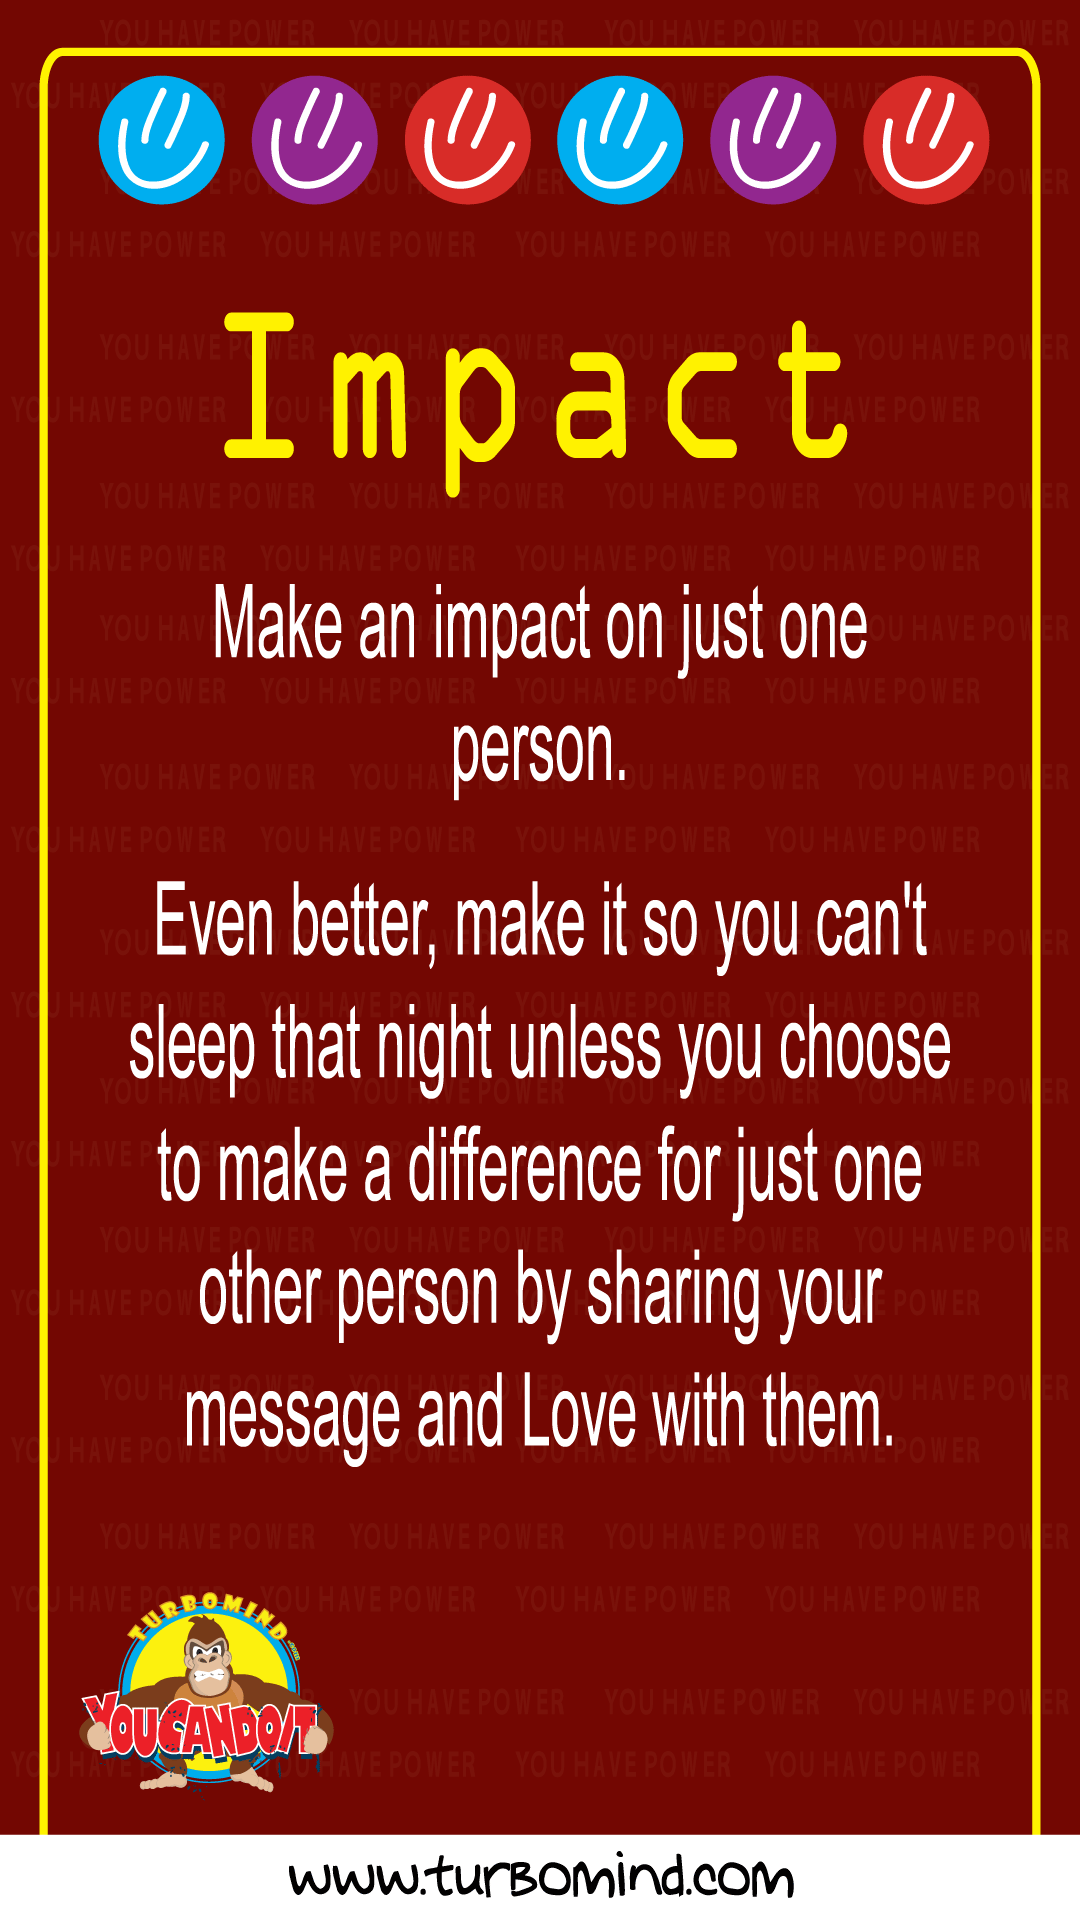 HAVE AN IMPACT